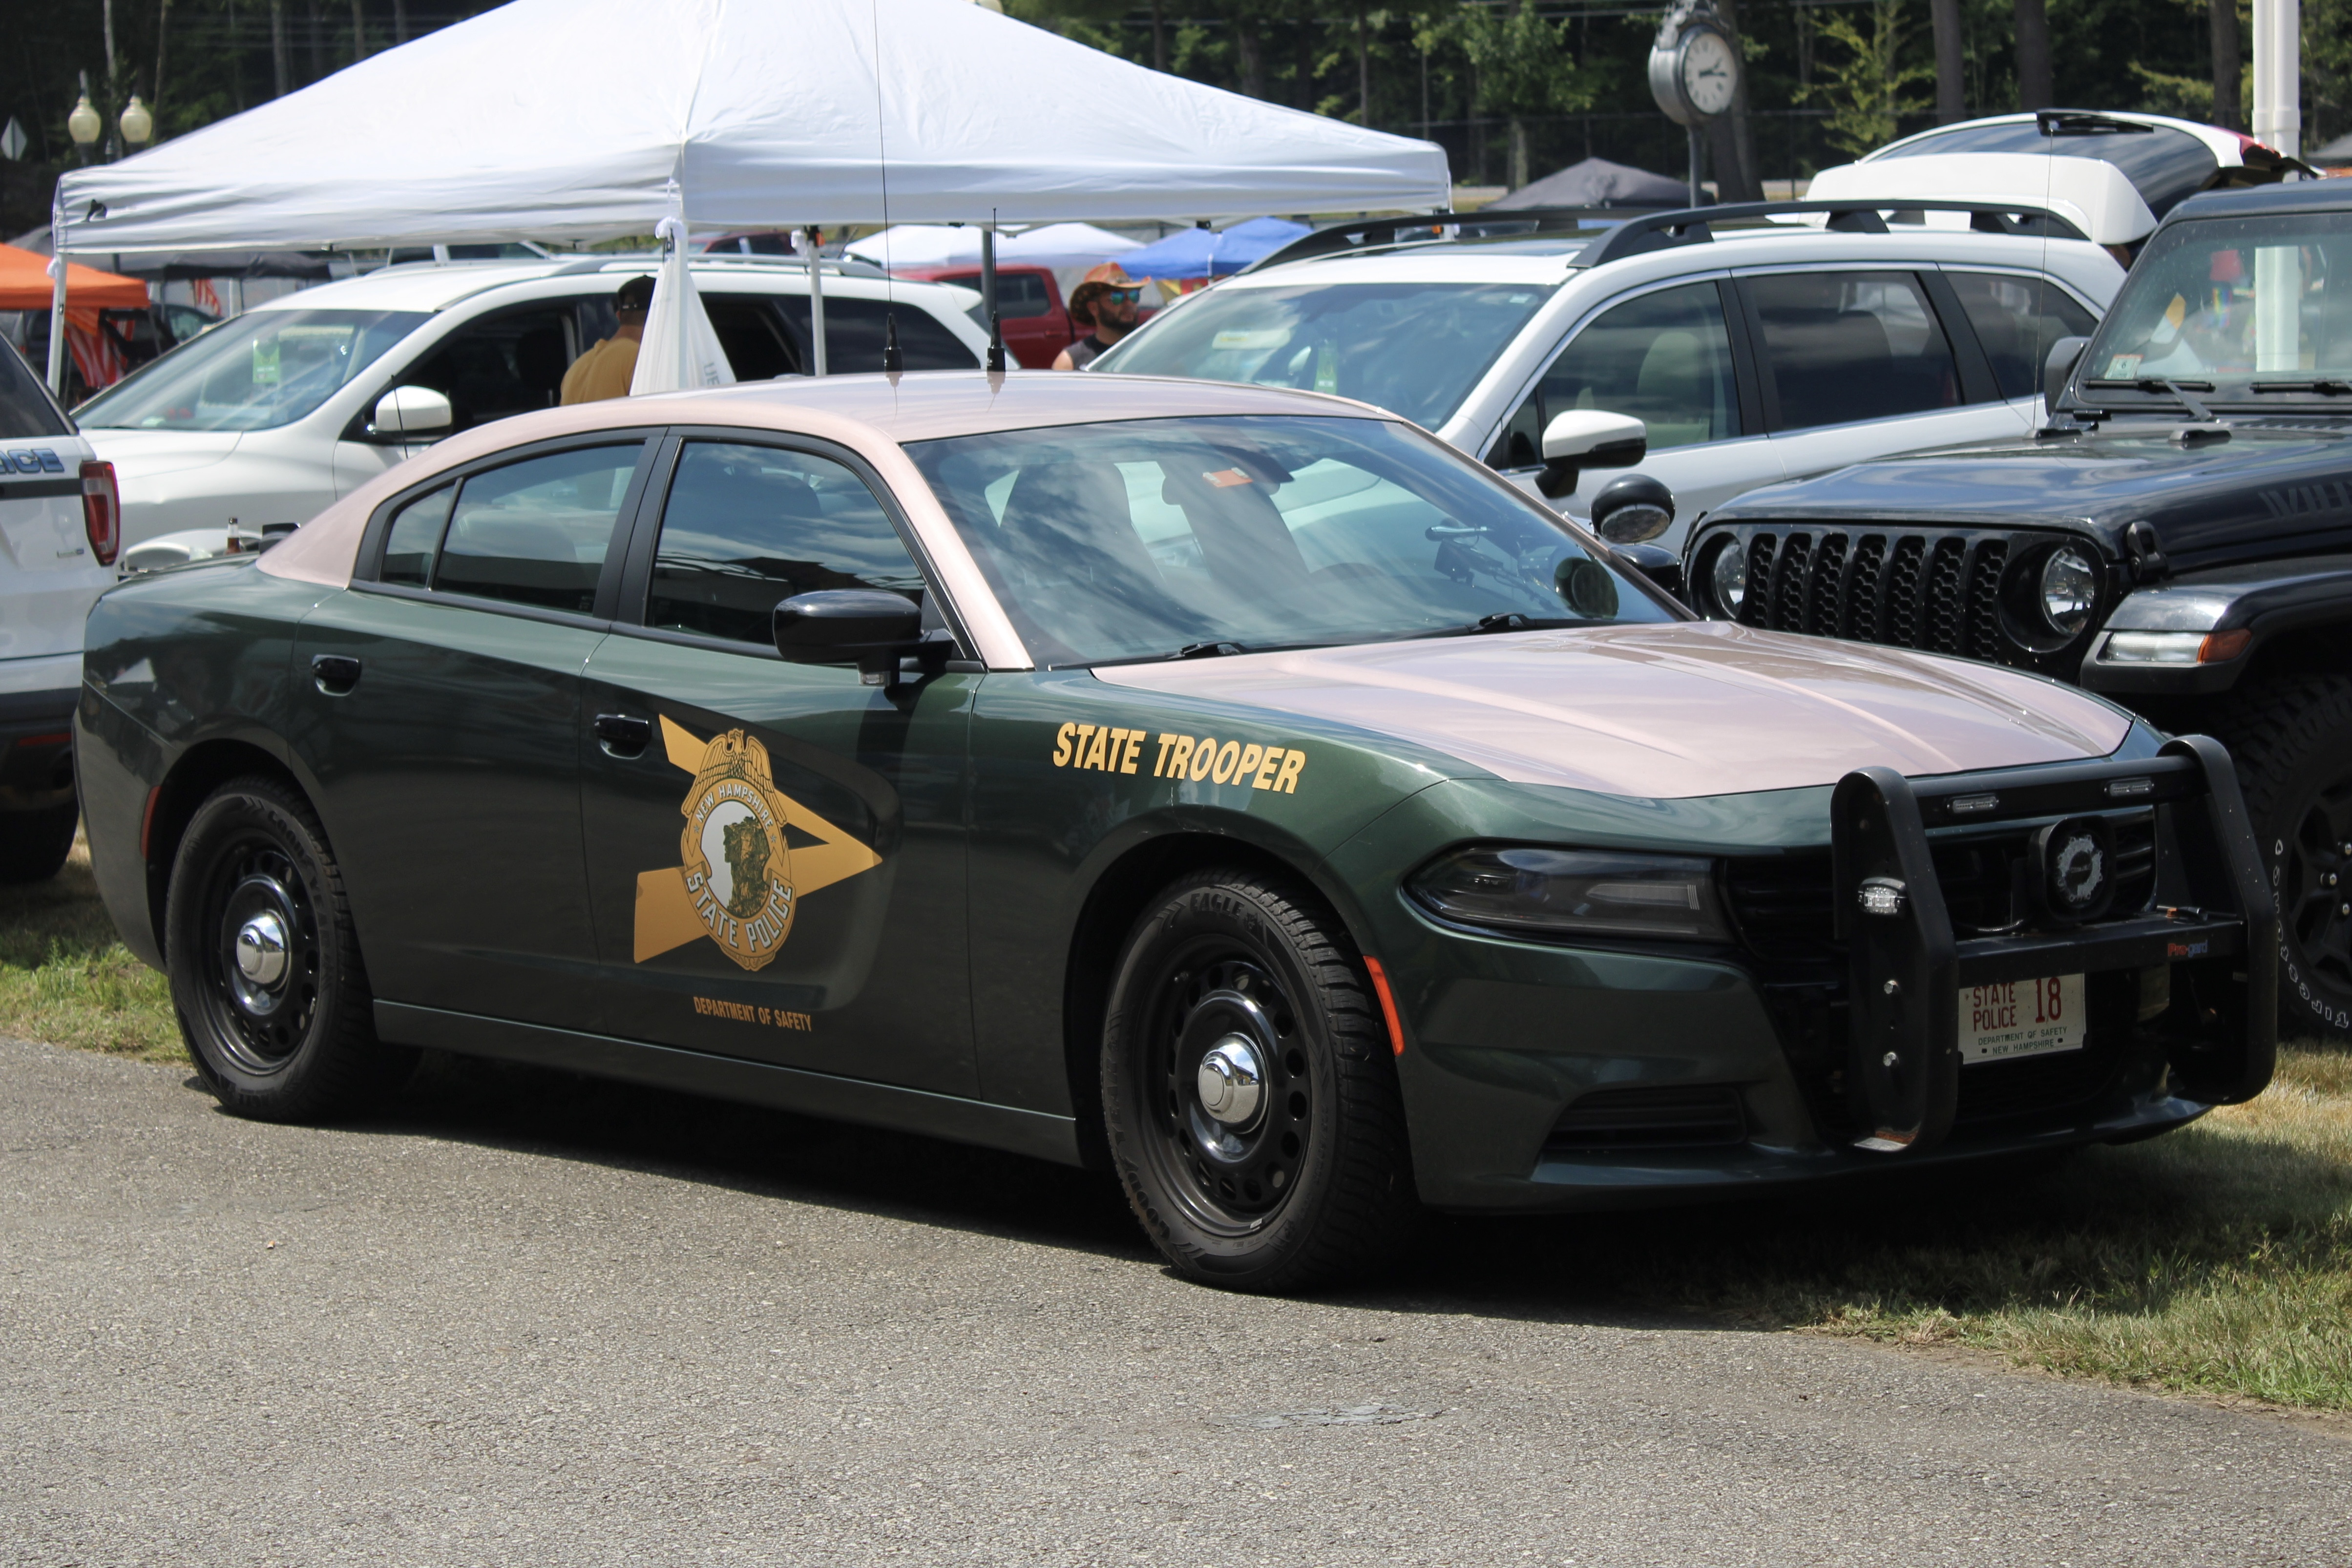 A photo  of New Hampshire State Police
            Cruiser 18, a 2017-2021 Dodge Charger             taken by @riemergencyvehicles